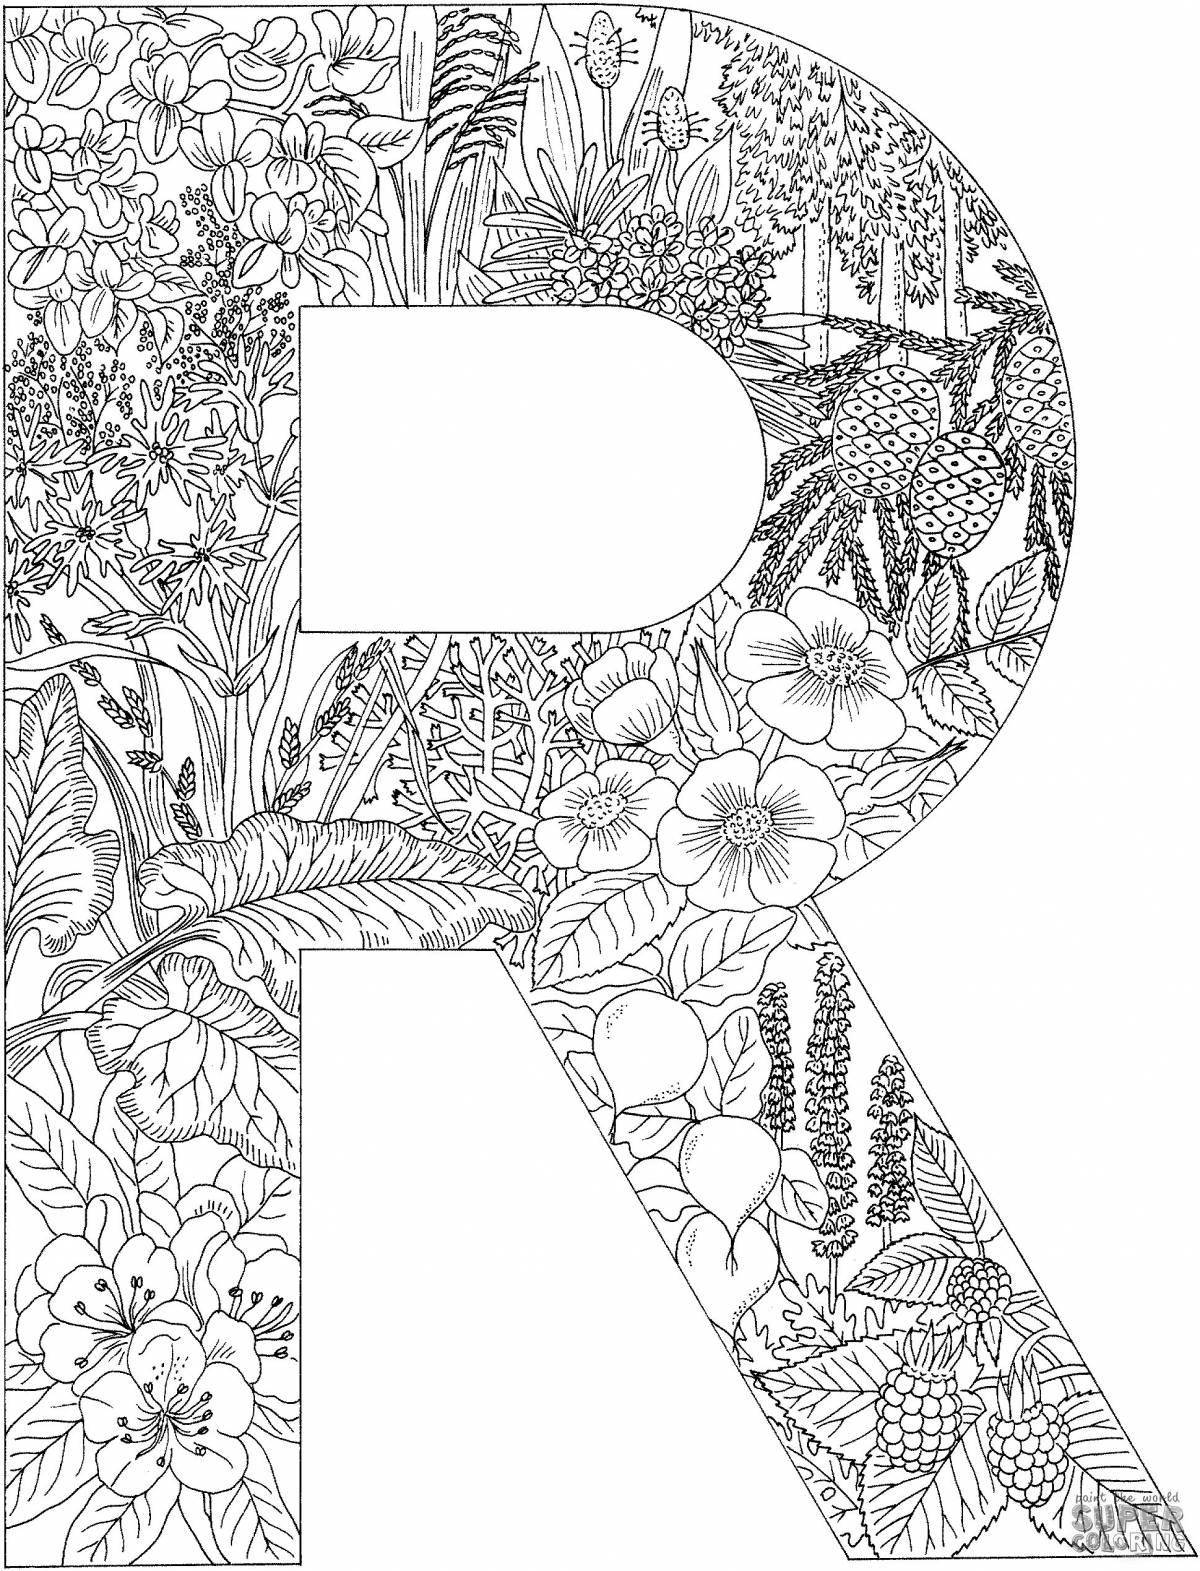 Coloring book captivating anti-stress letters